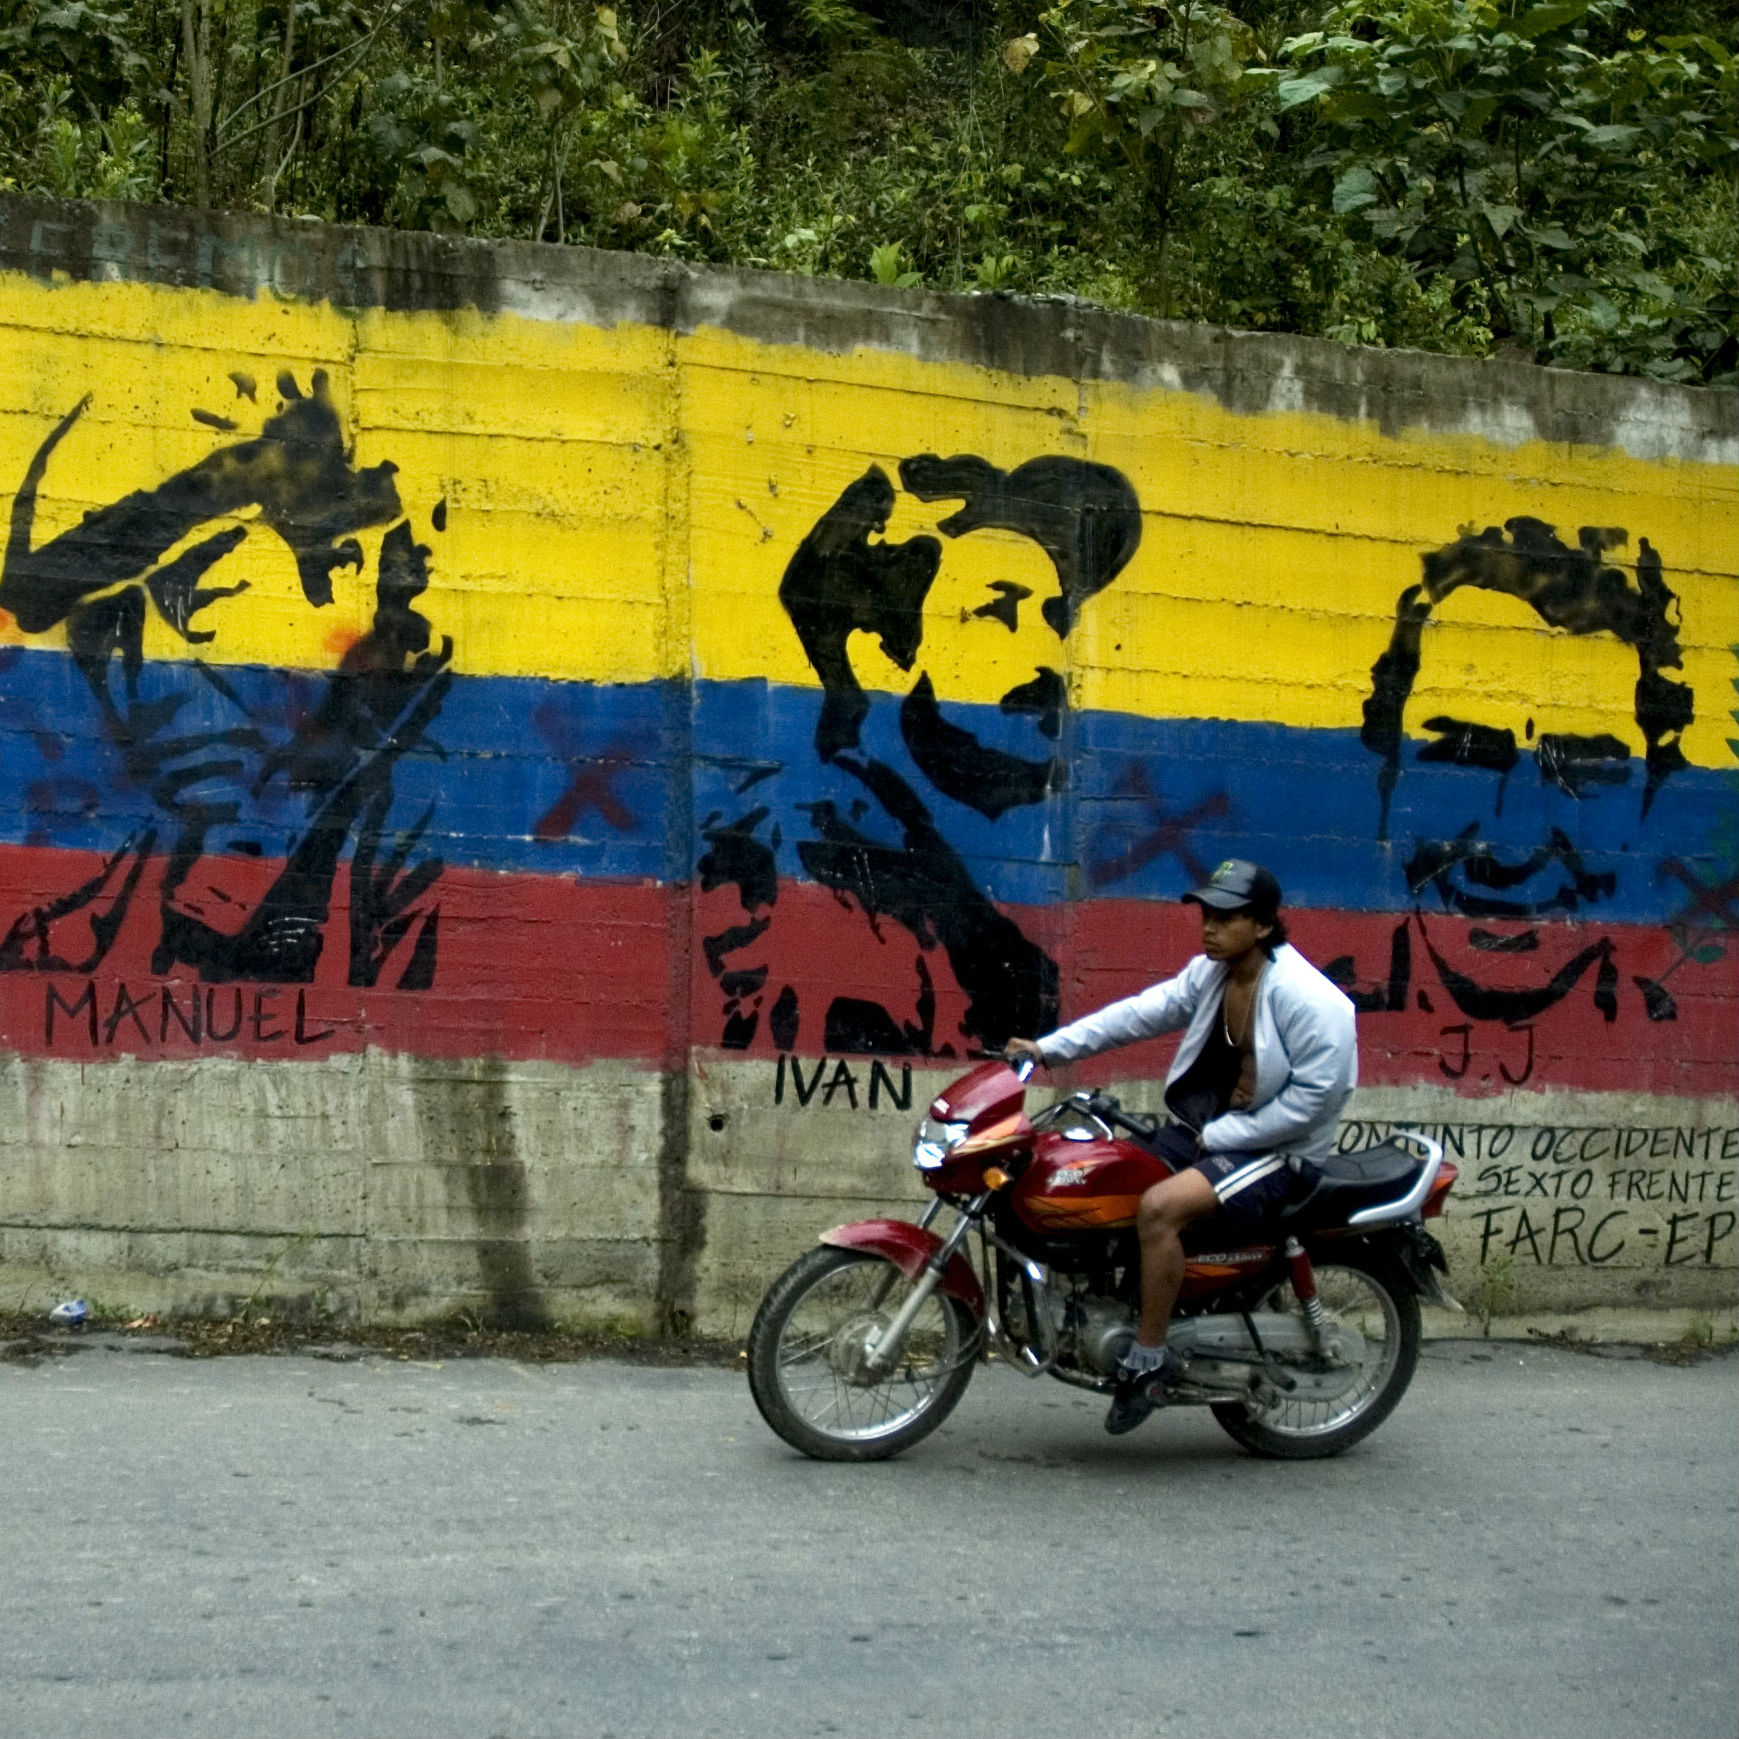 Christian leaders pessimistic about Government peace deal with FARC rebels